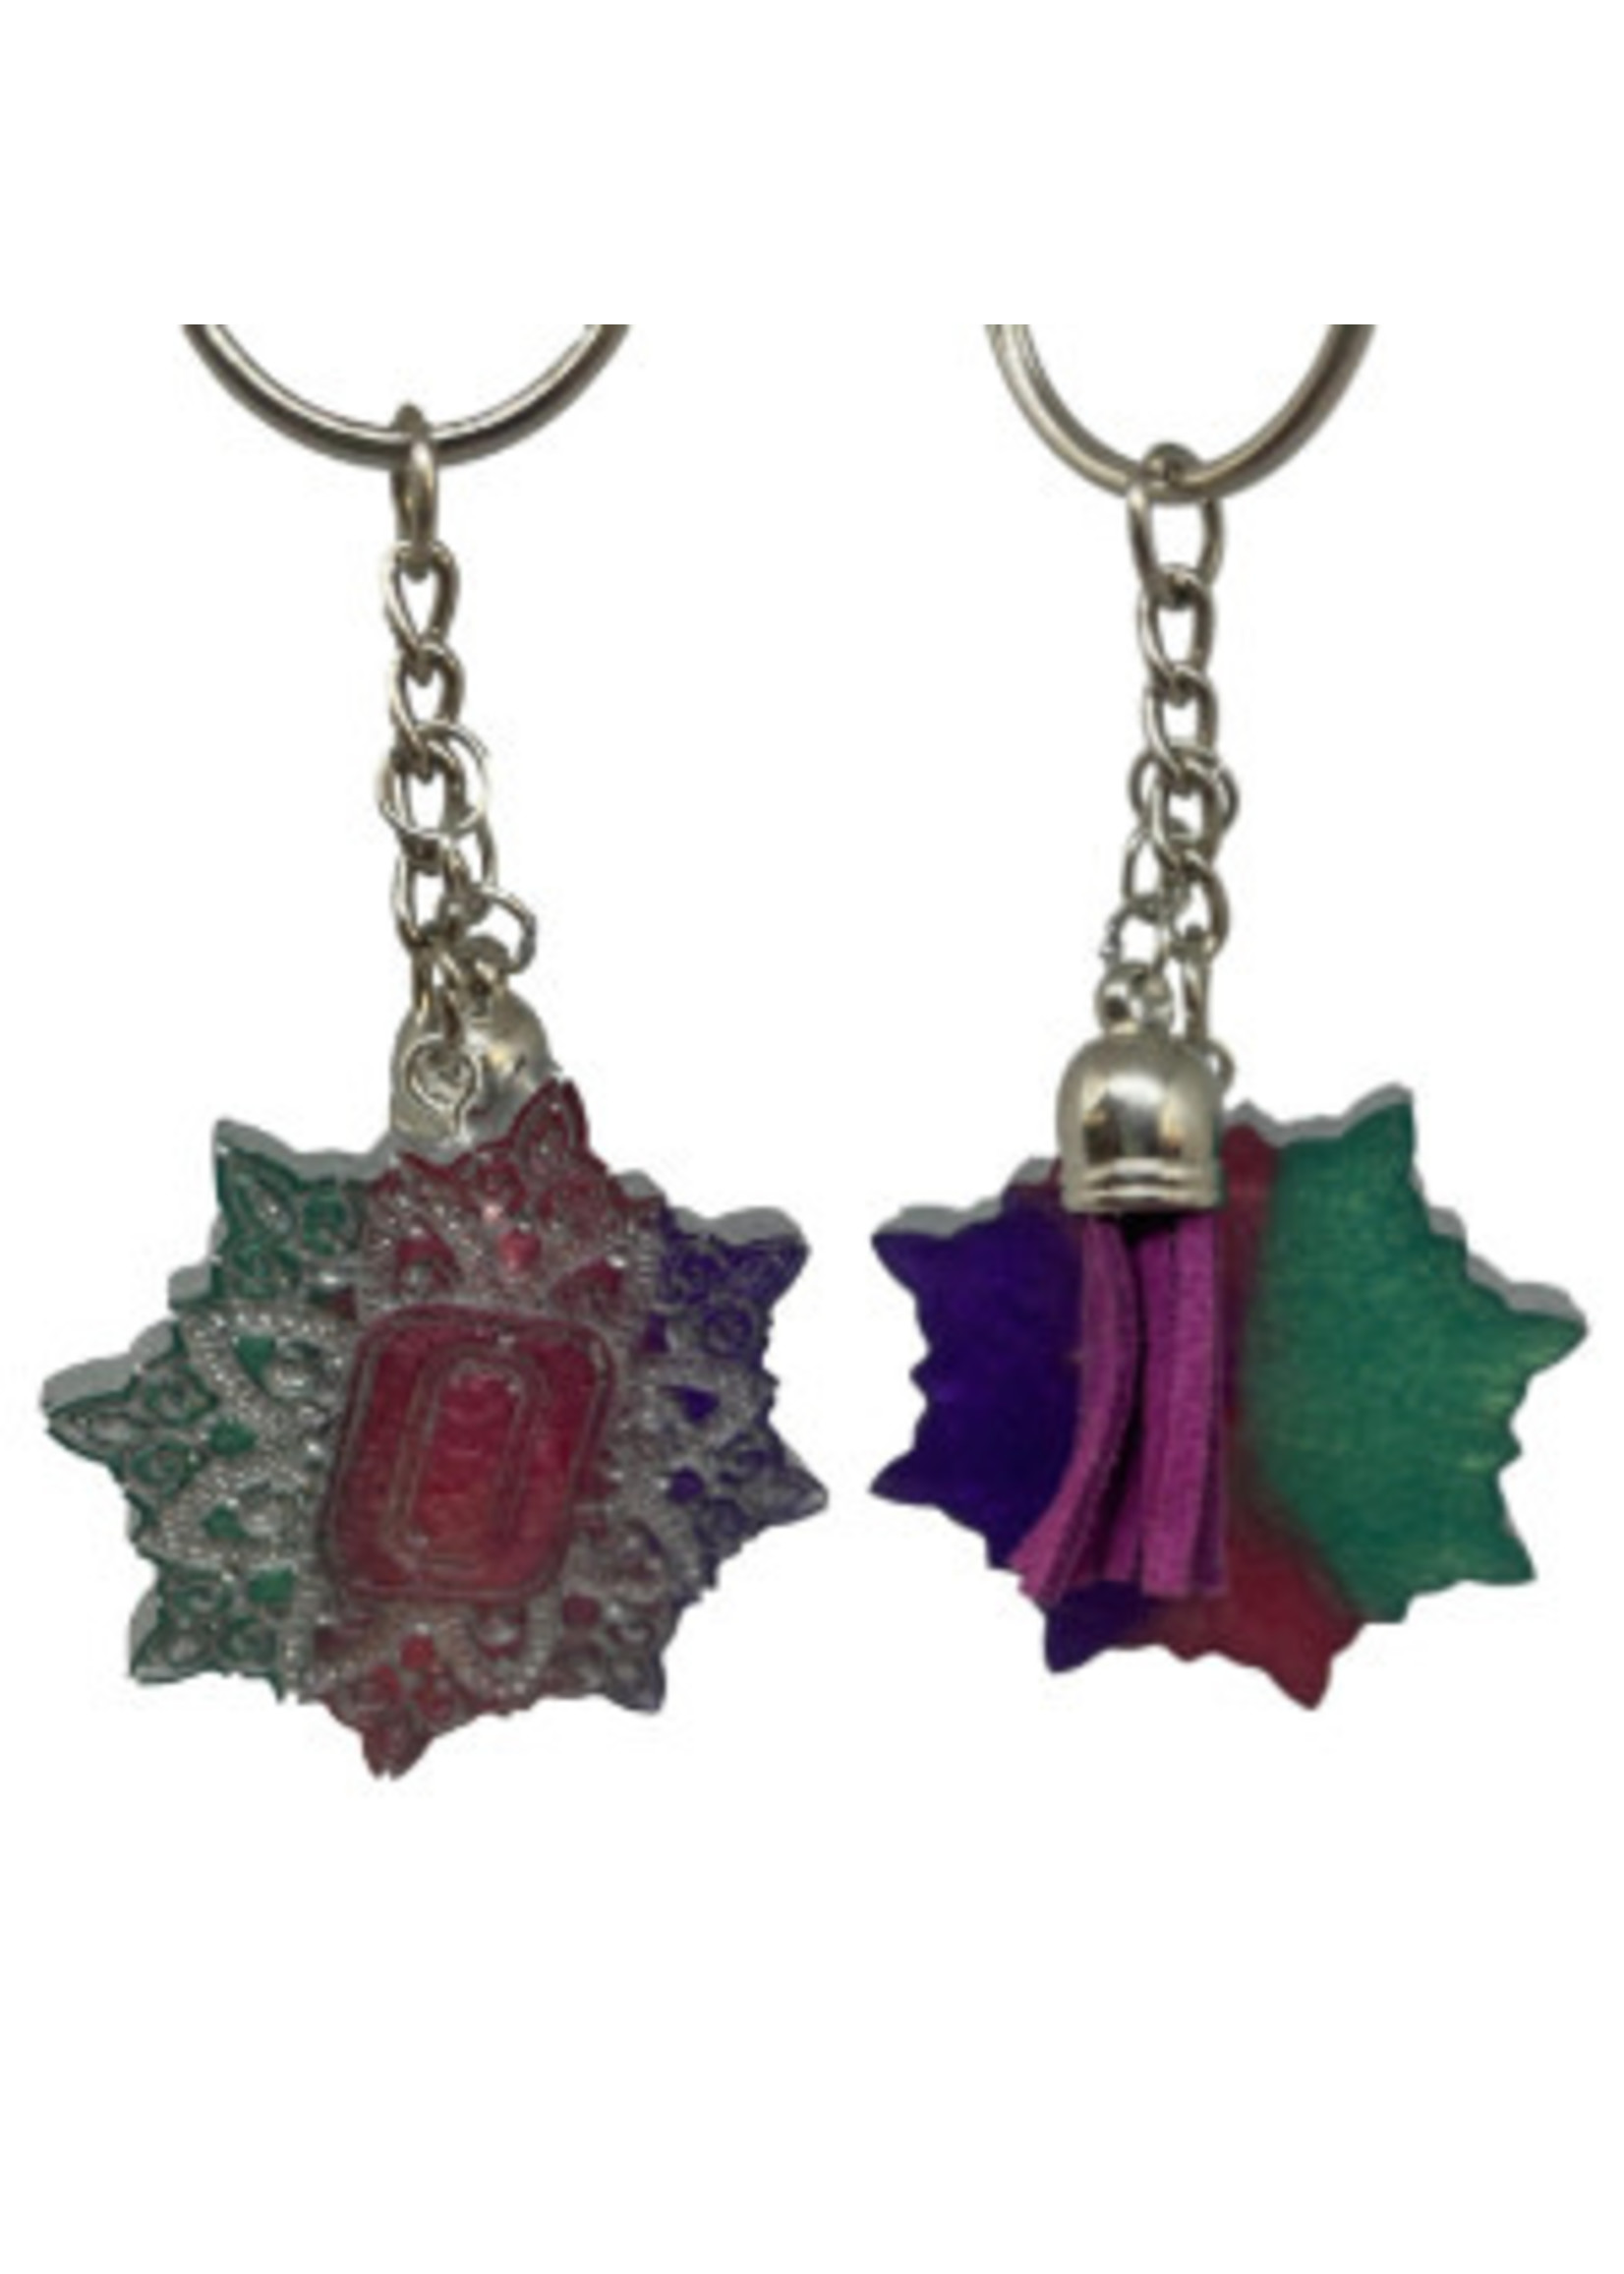 East Coast Sirens Floral 6-pointed Initial Keychain "J-R"